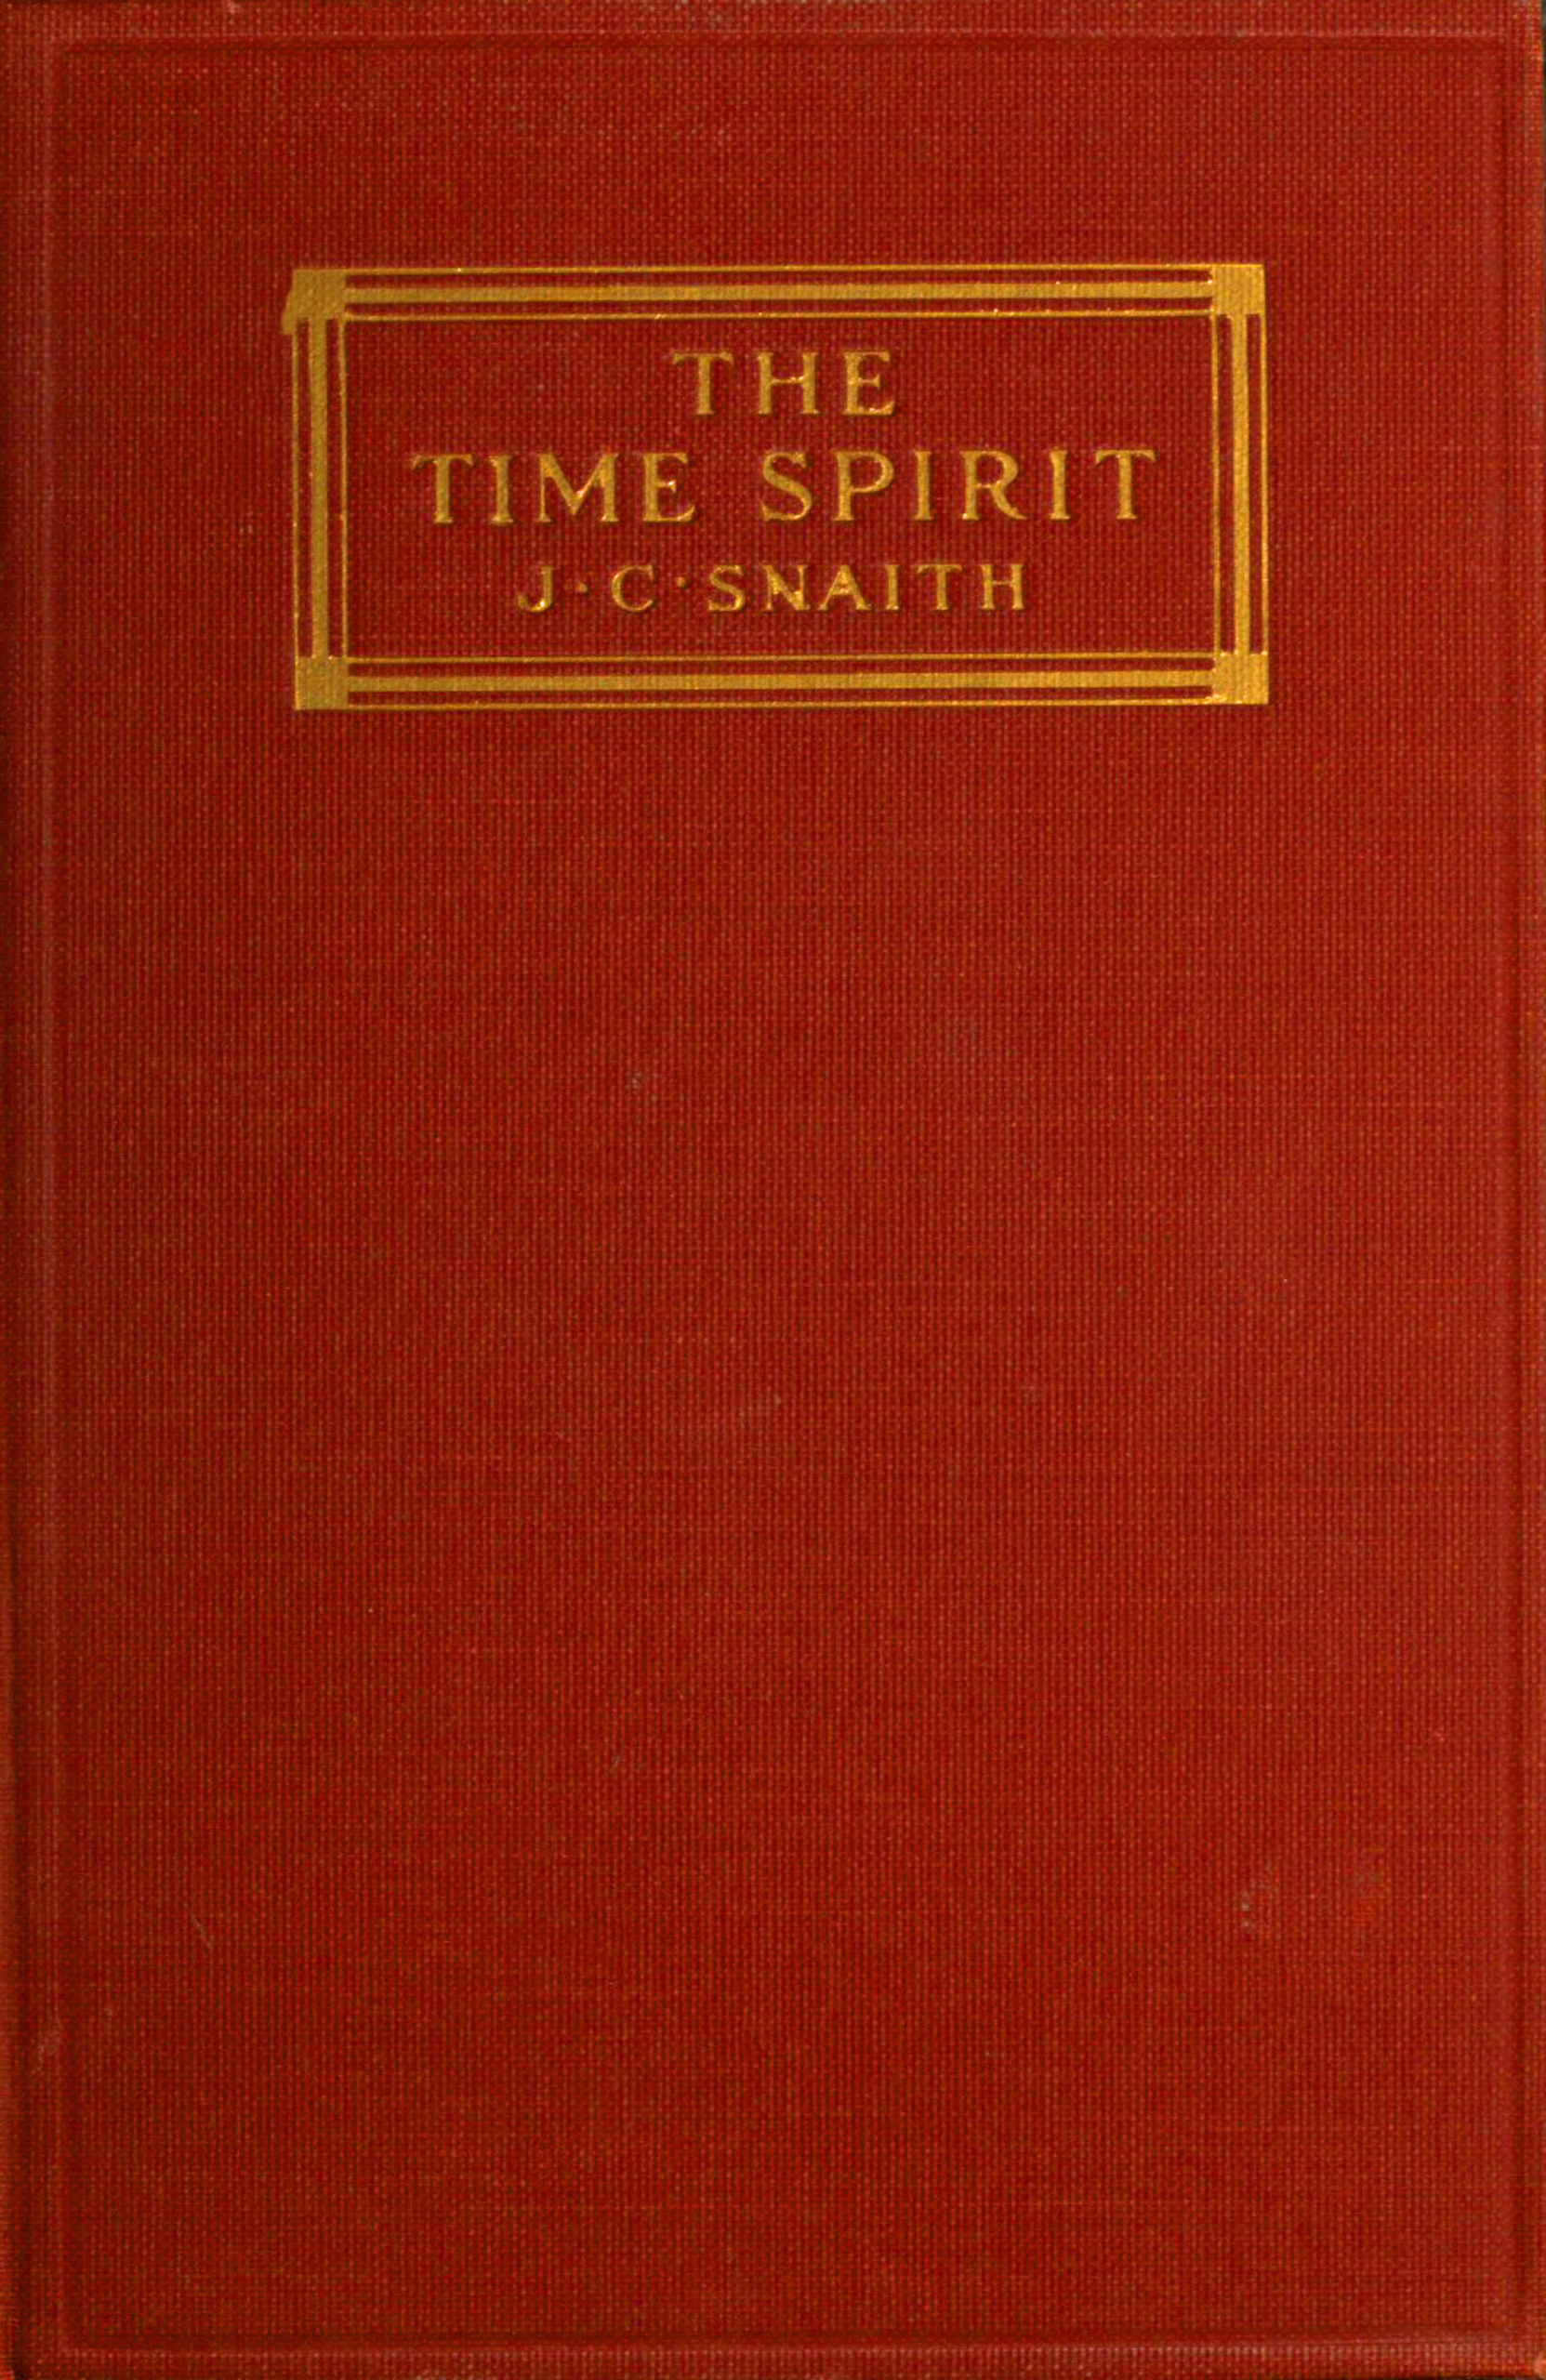 The Time Spirit, by J